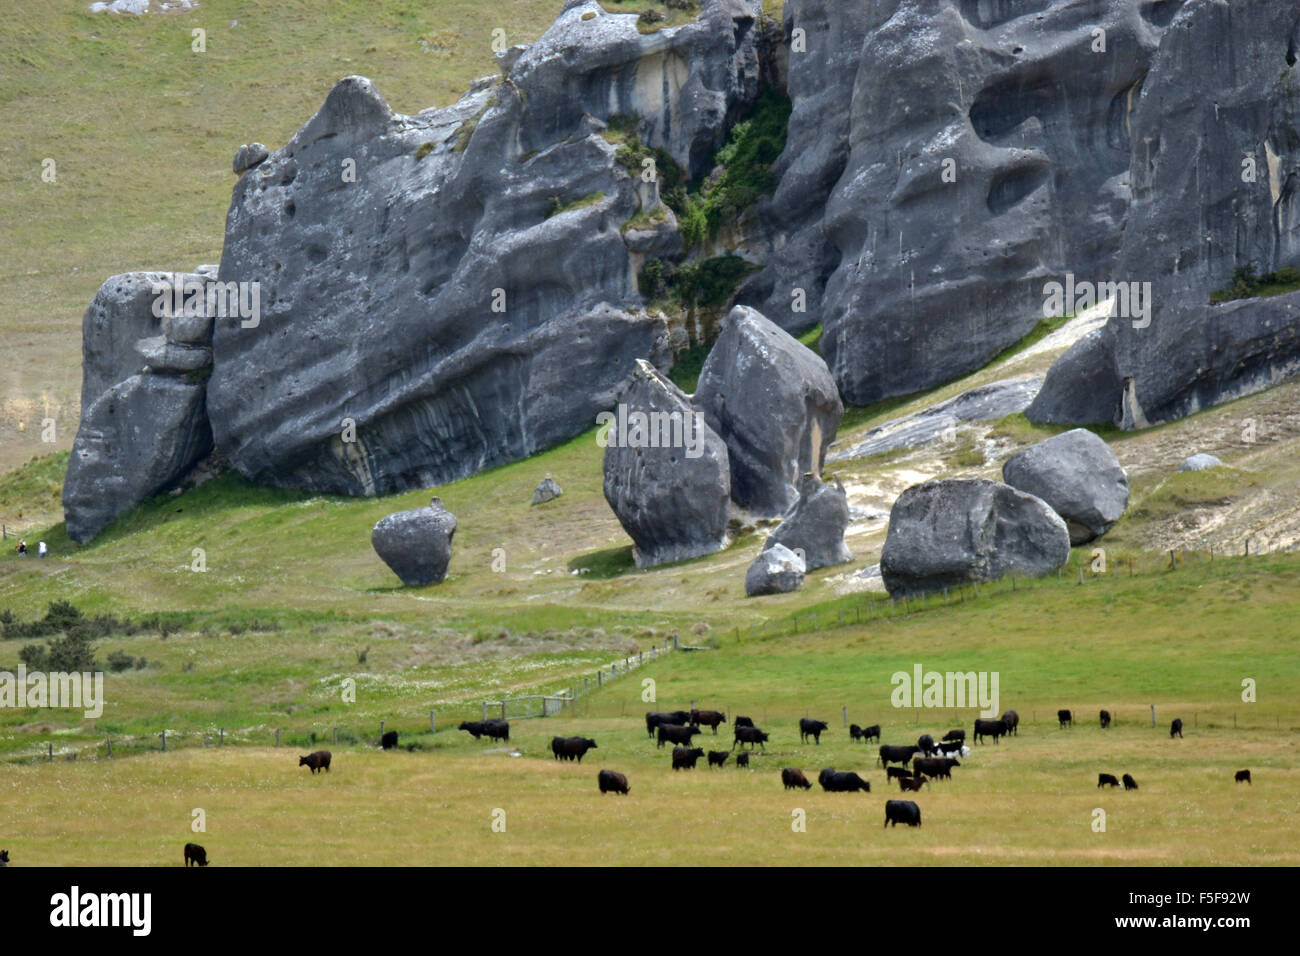 Geological limestone formations at Kura Tawhiti or Castle Hill Conservation Area, Arthur's Pass, South Island, New Zealand Stock Photo